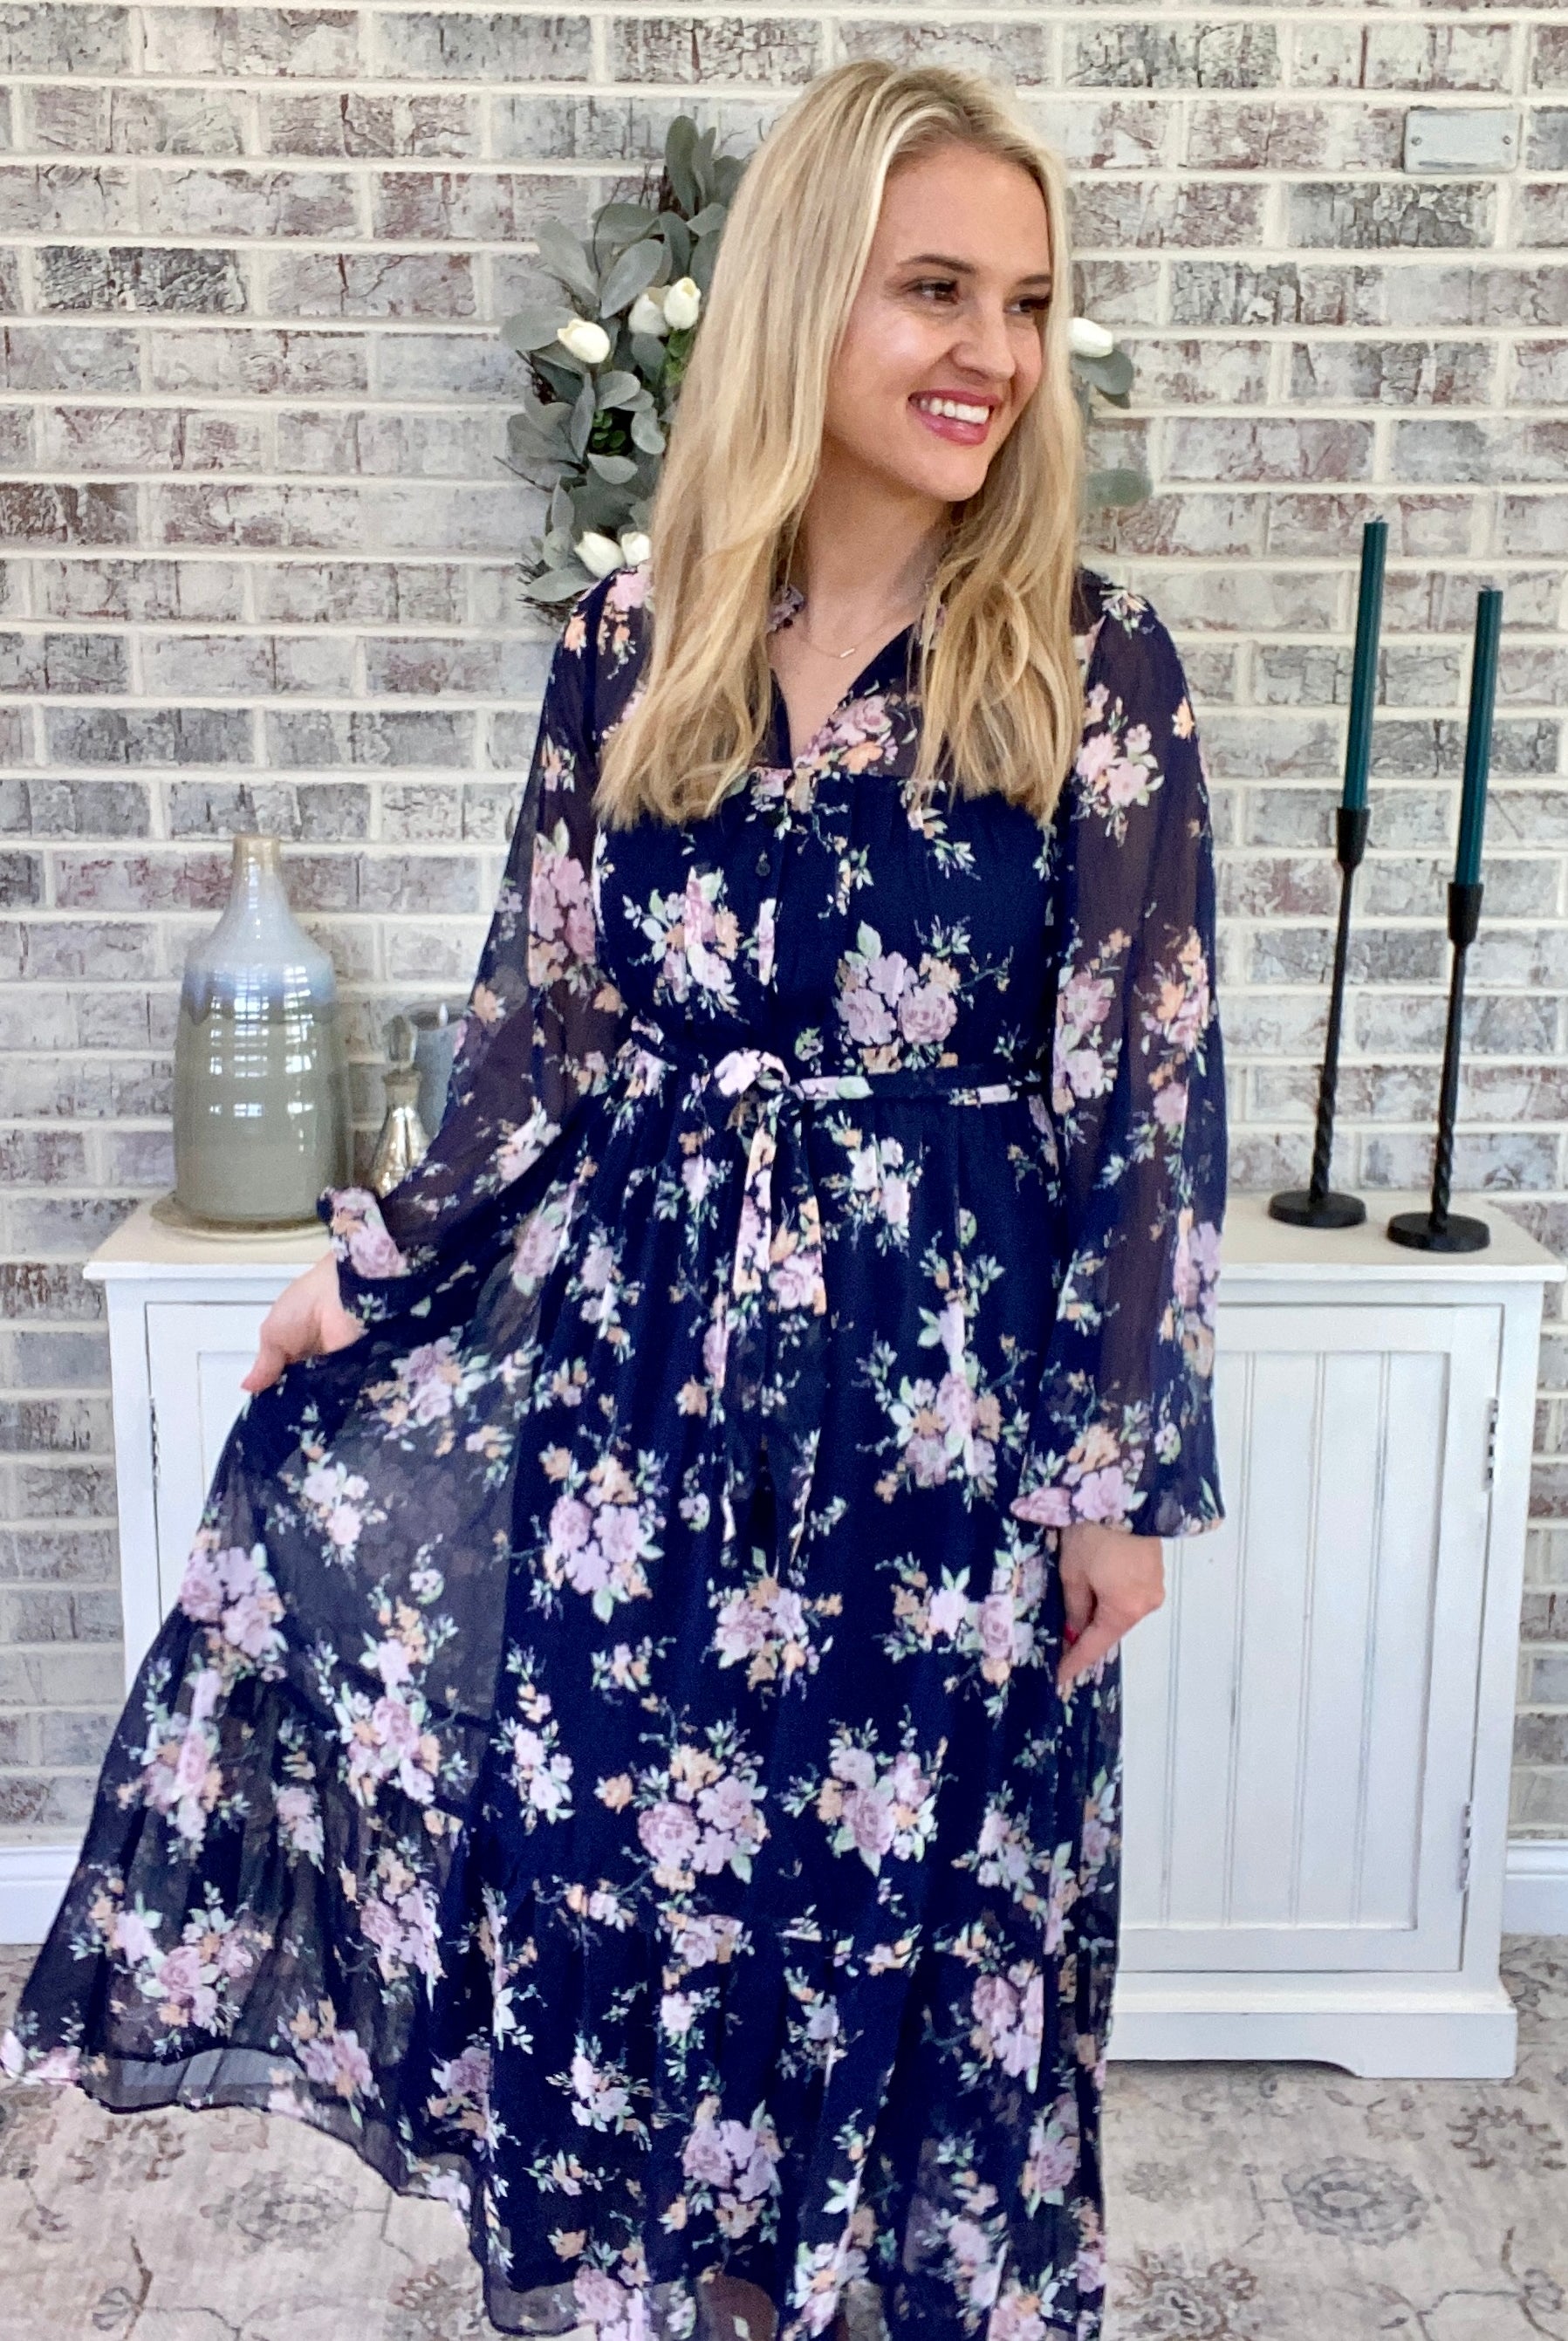 Spring Blooms Maxi Dress-Dresses-The Lovely Closet-The Lovely Closet, Women's Fashion Boutique in Alexandria, KY